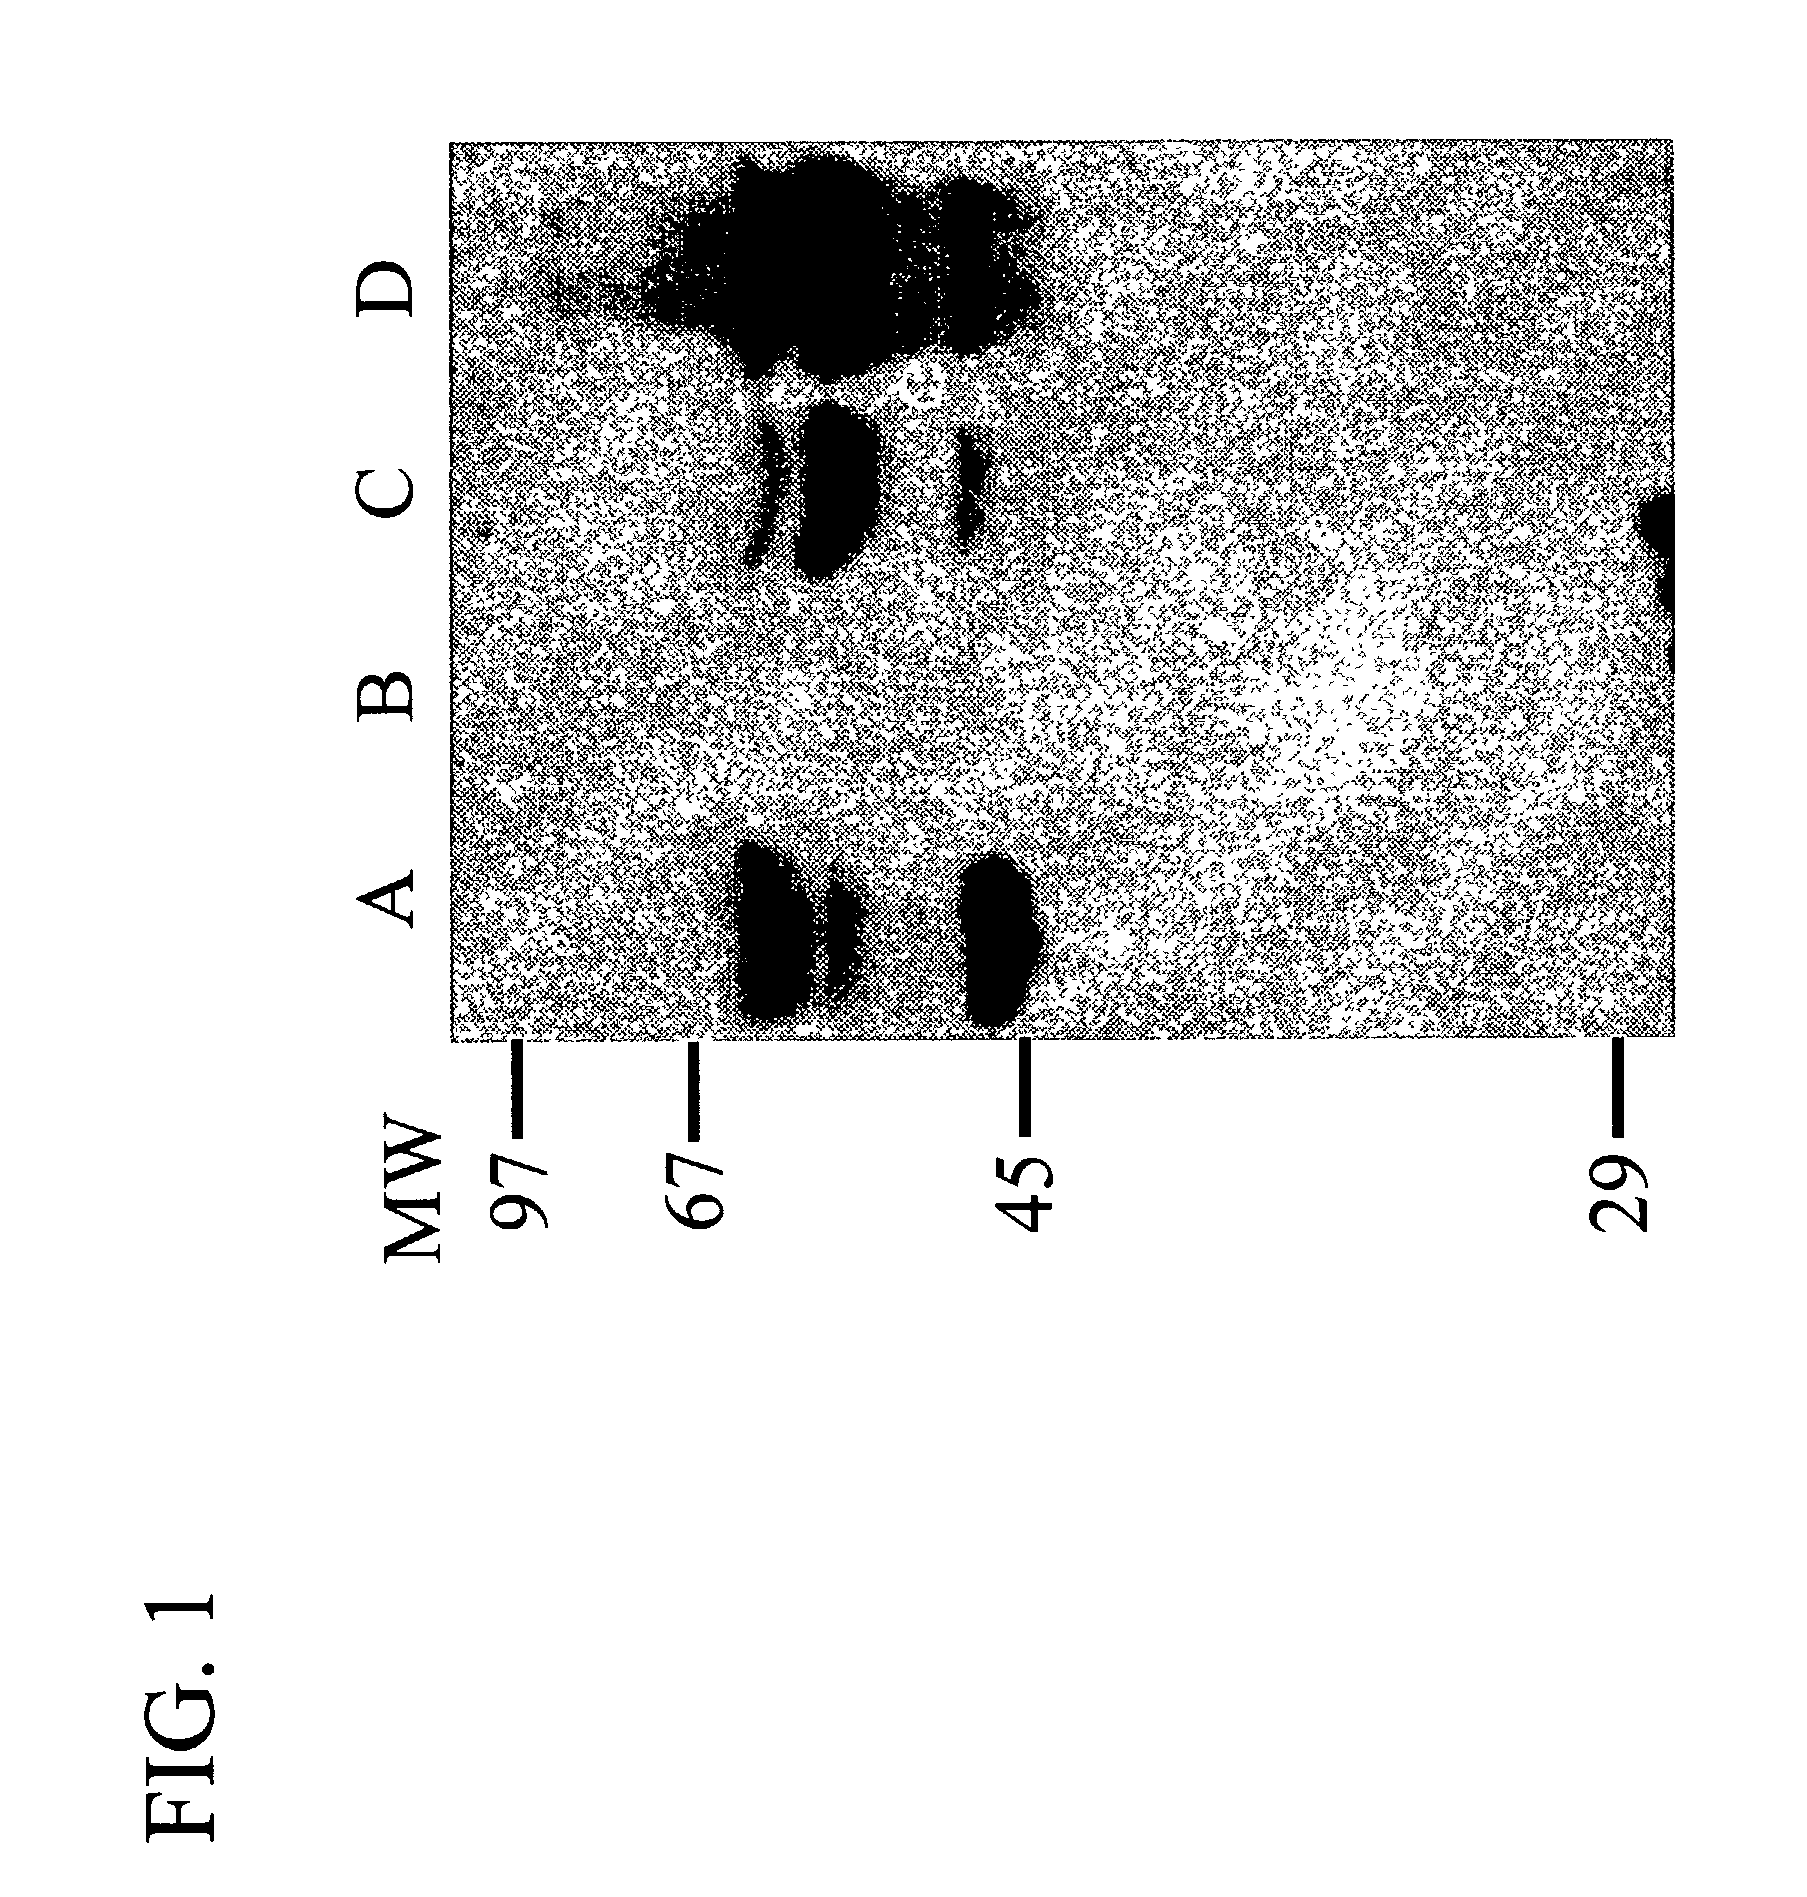 Methods for treating breast cancer using a mammary cell growth inhibitor